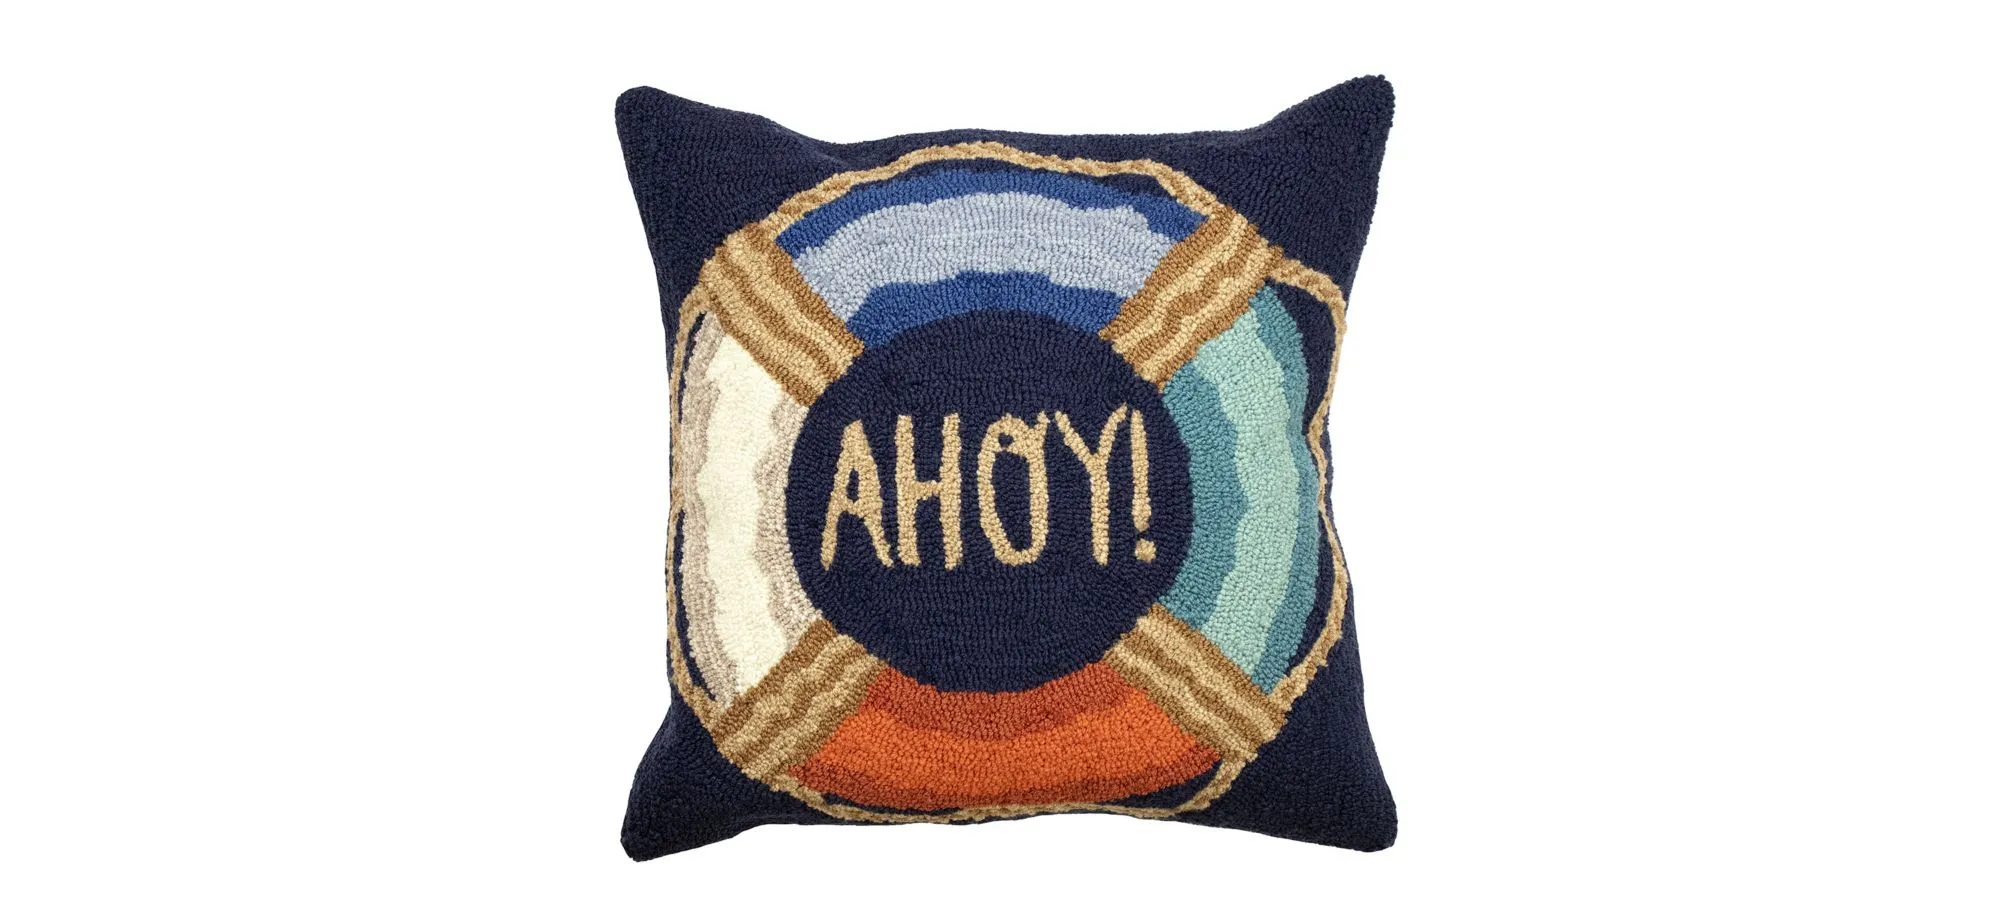 Liora Manne Frontporch Ahoy Pillow in Navy by Trans-Ocean Import Co Inc